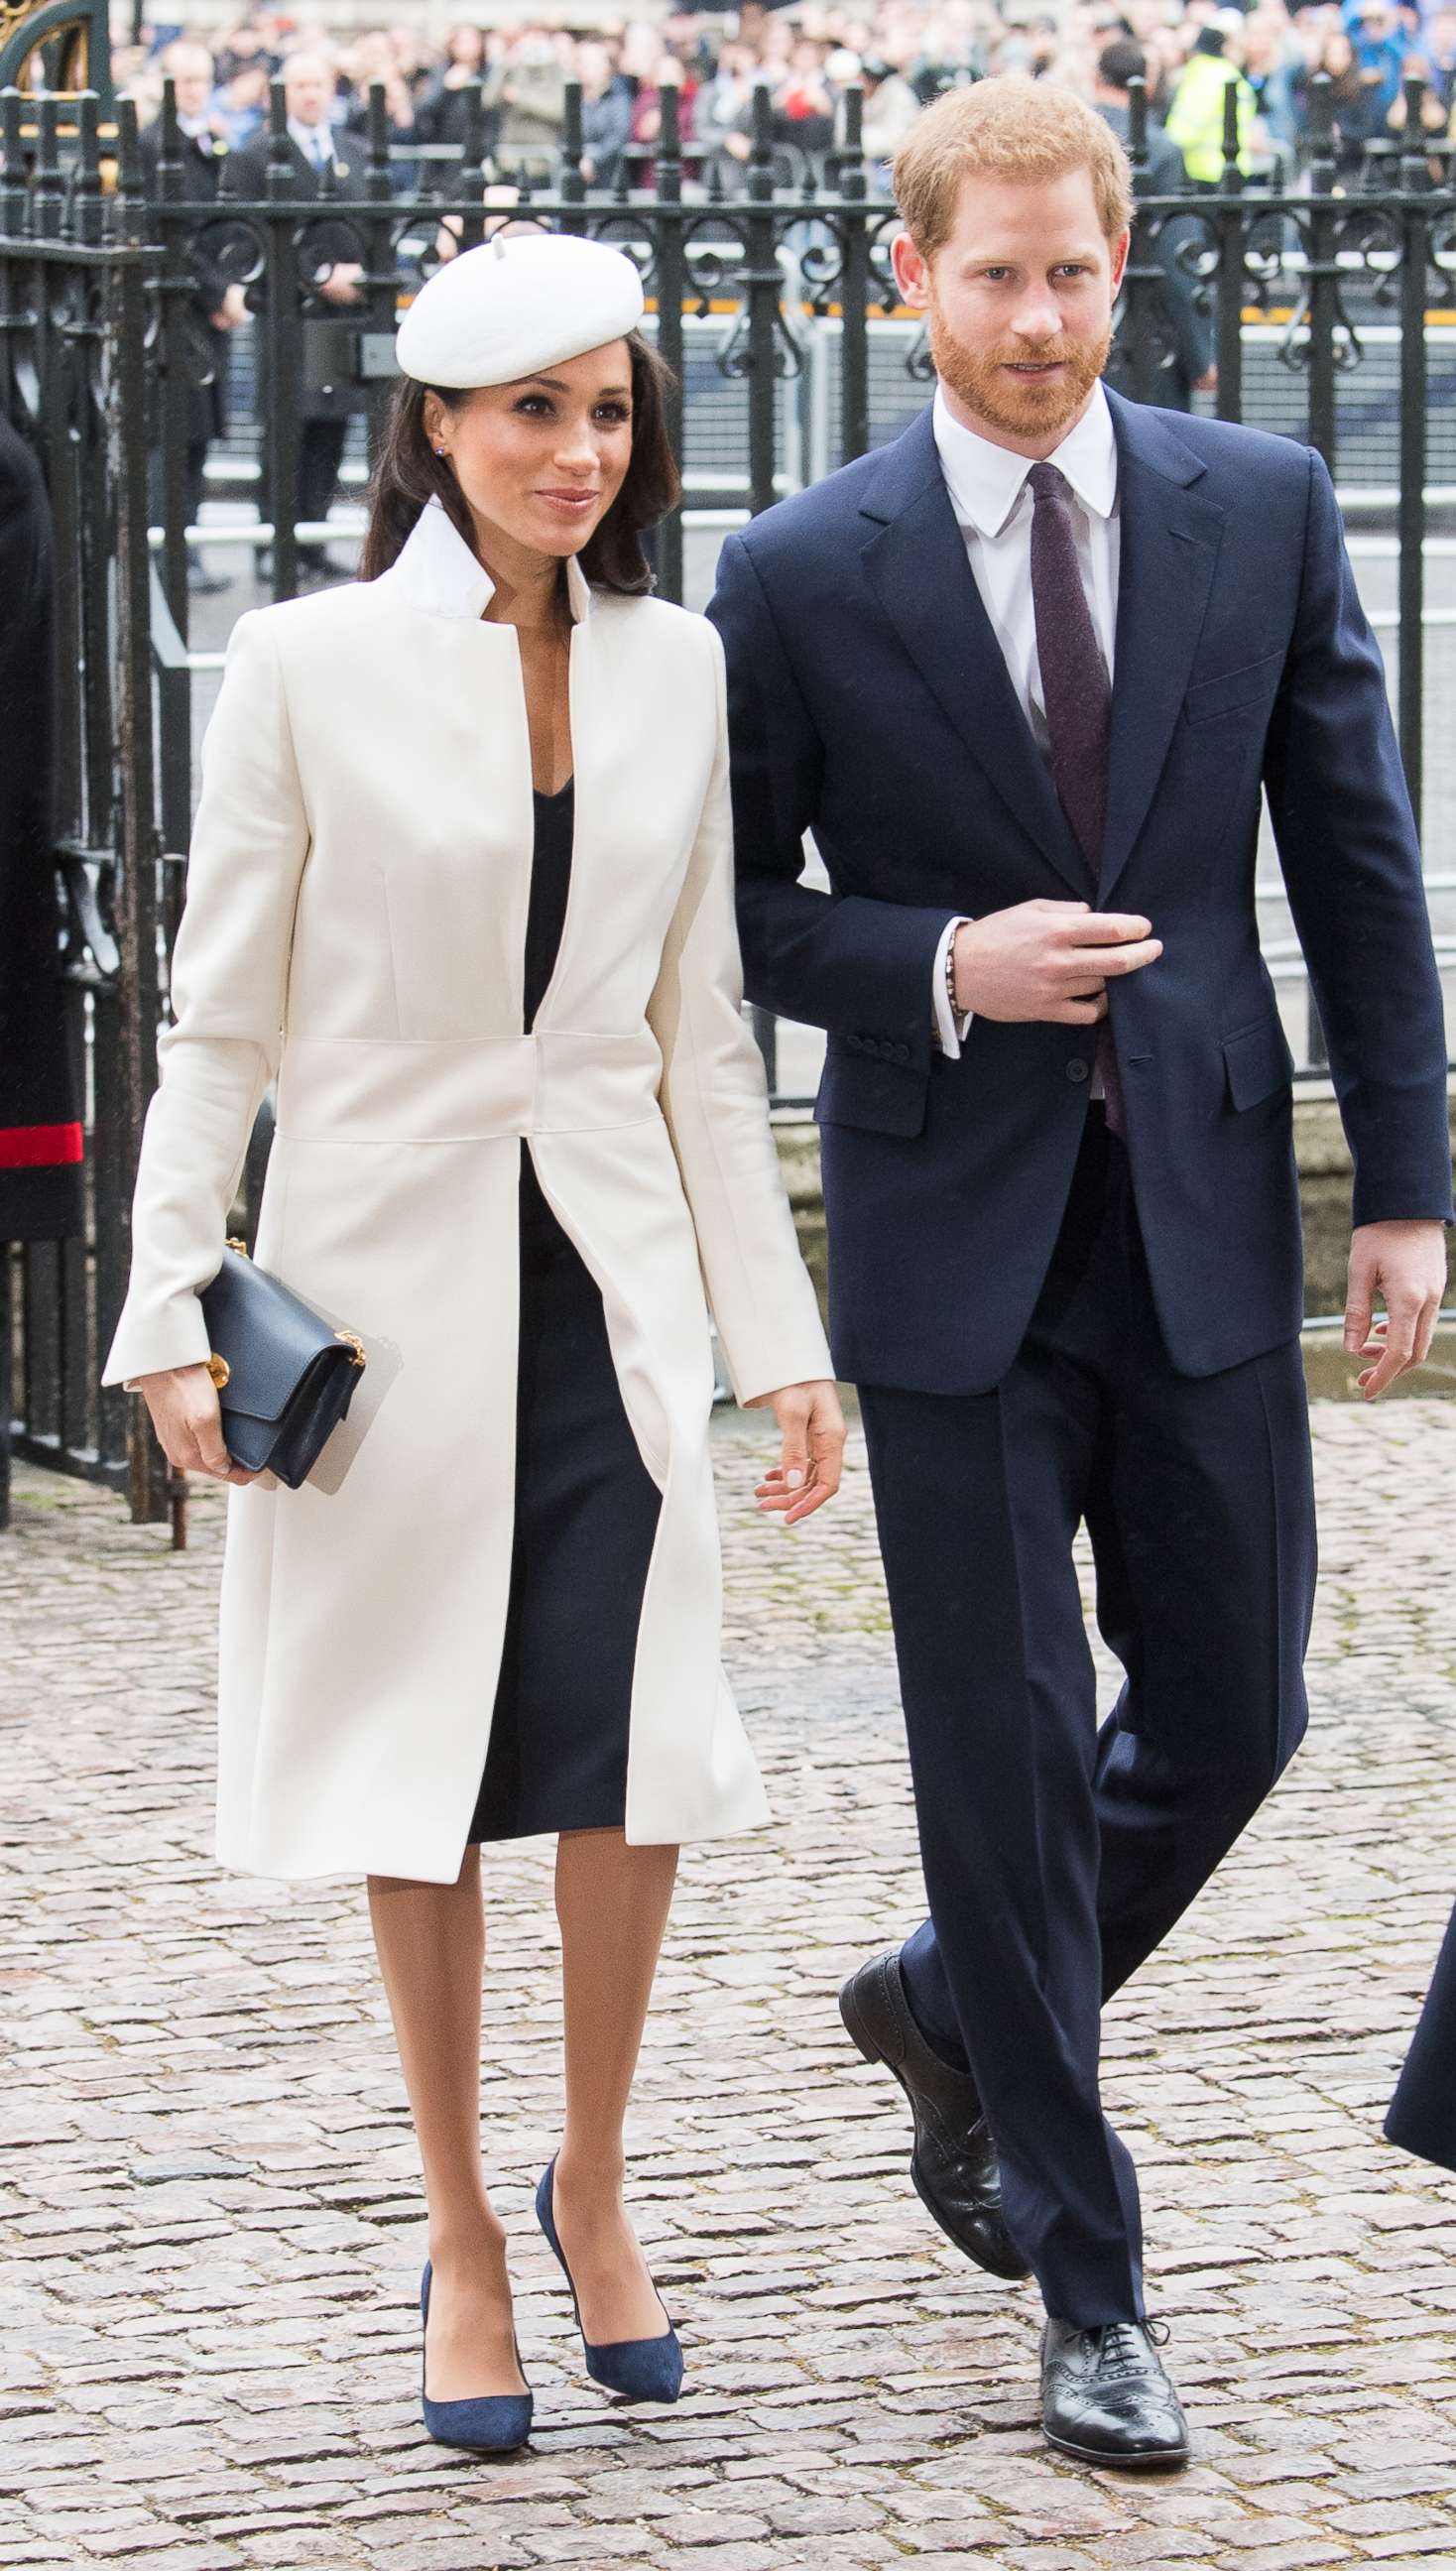 PHOTO: Meghan Markle and Prince Harry attend the 2018 Commonwealth Day service at Westminster Abbey, March 12, 2018, in London.